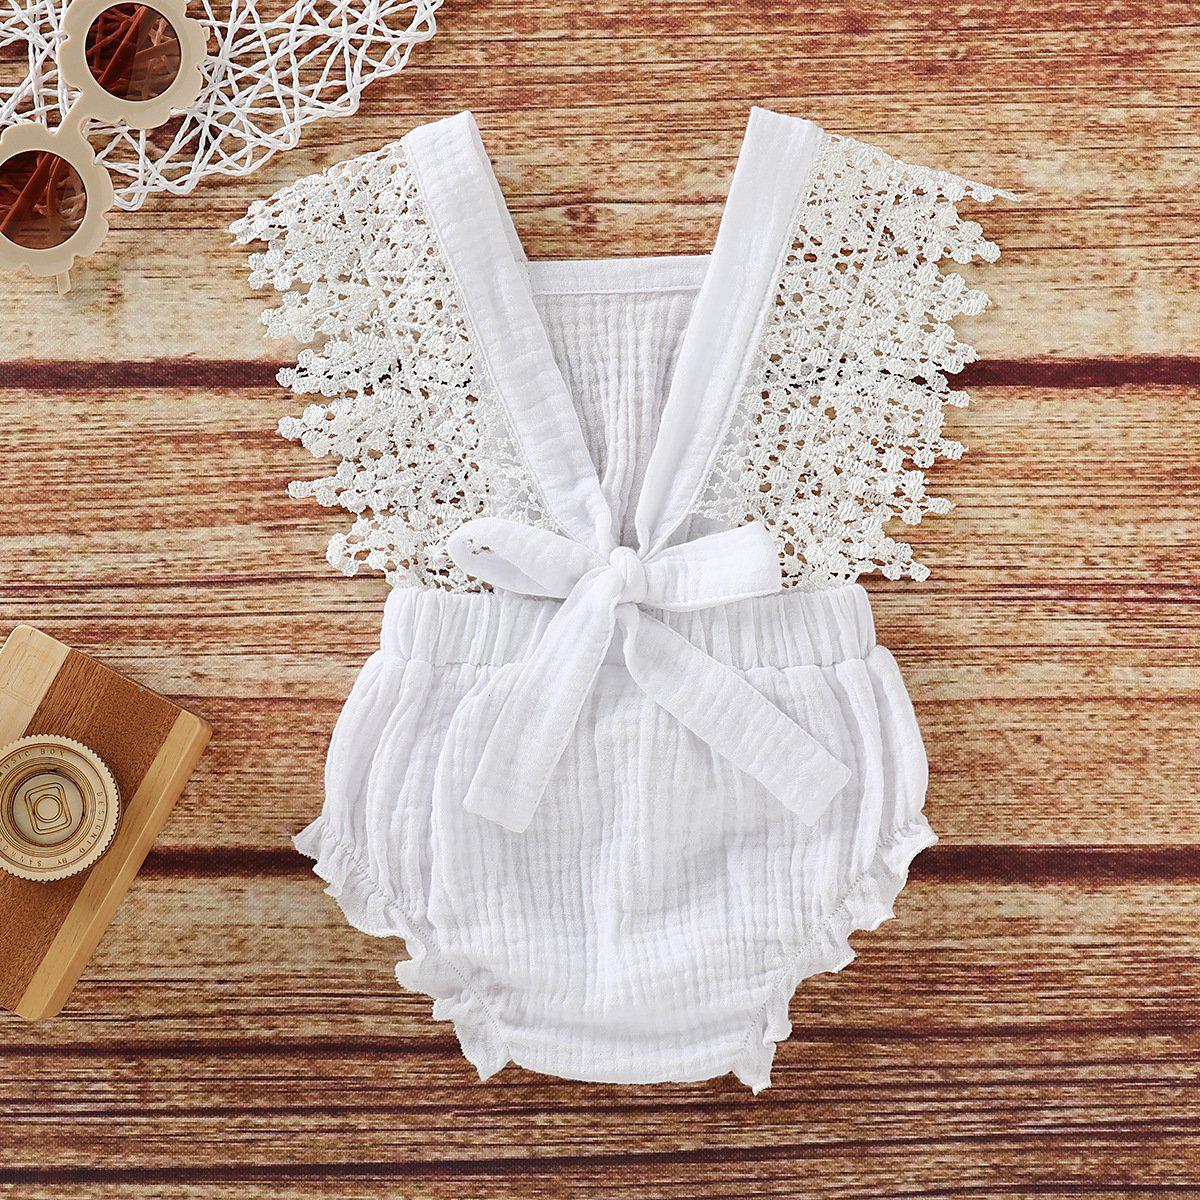 Baby Lace Cotton Onesies